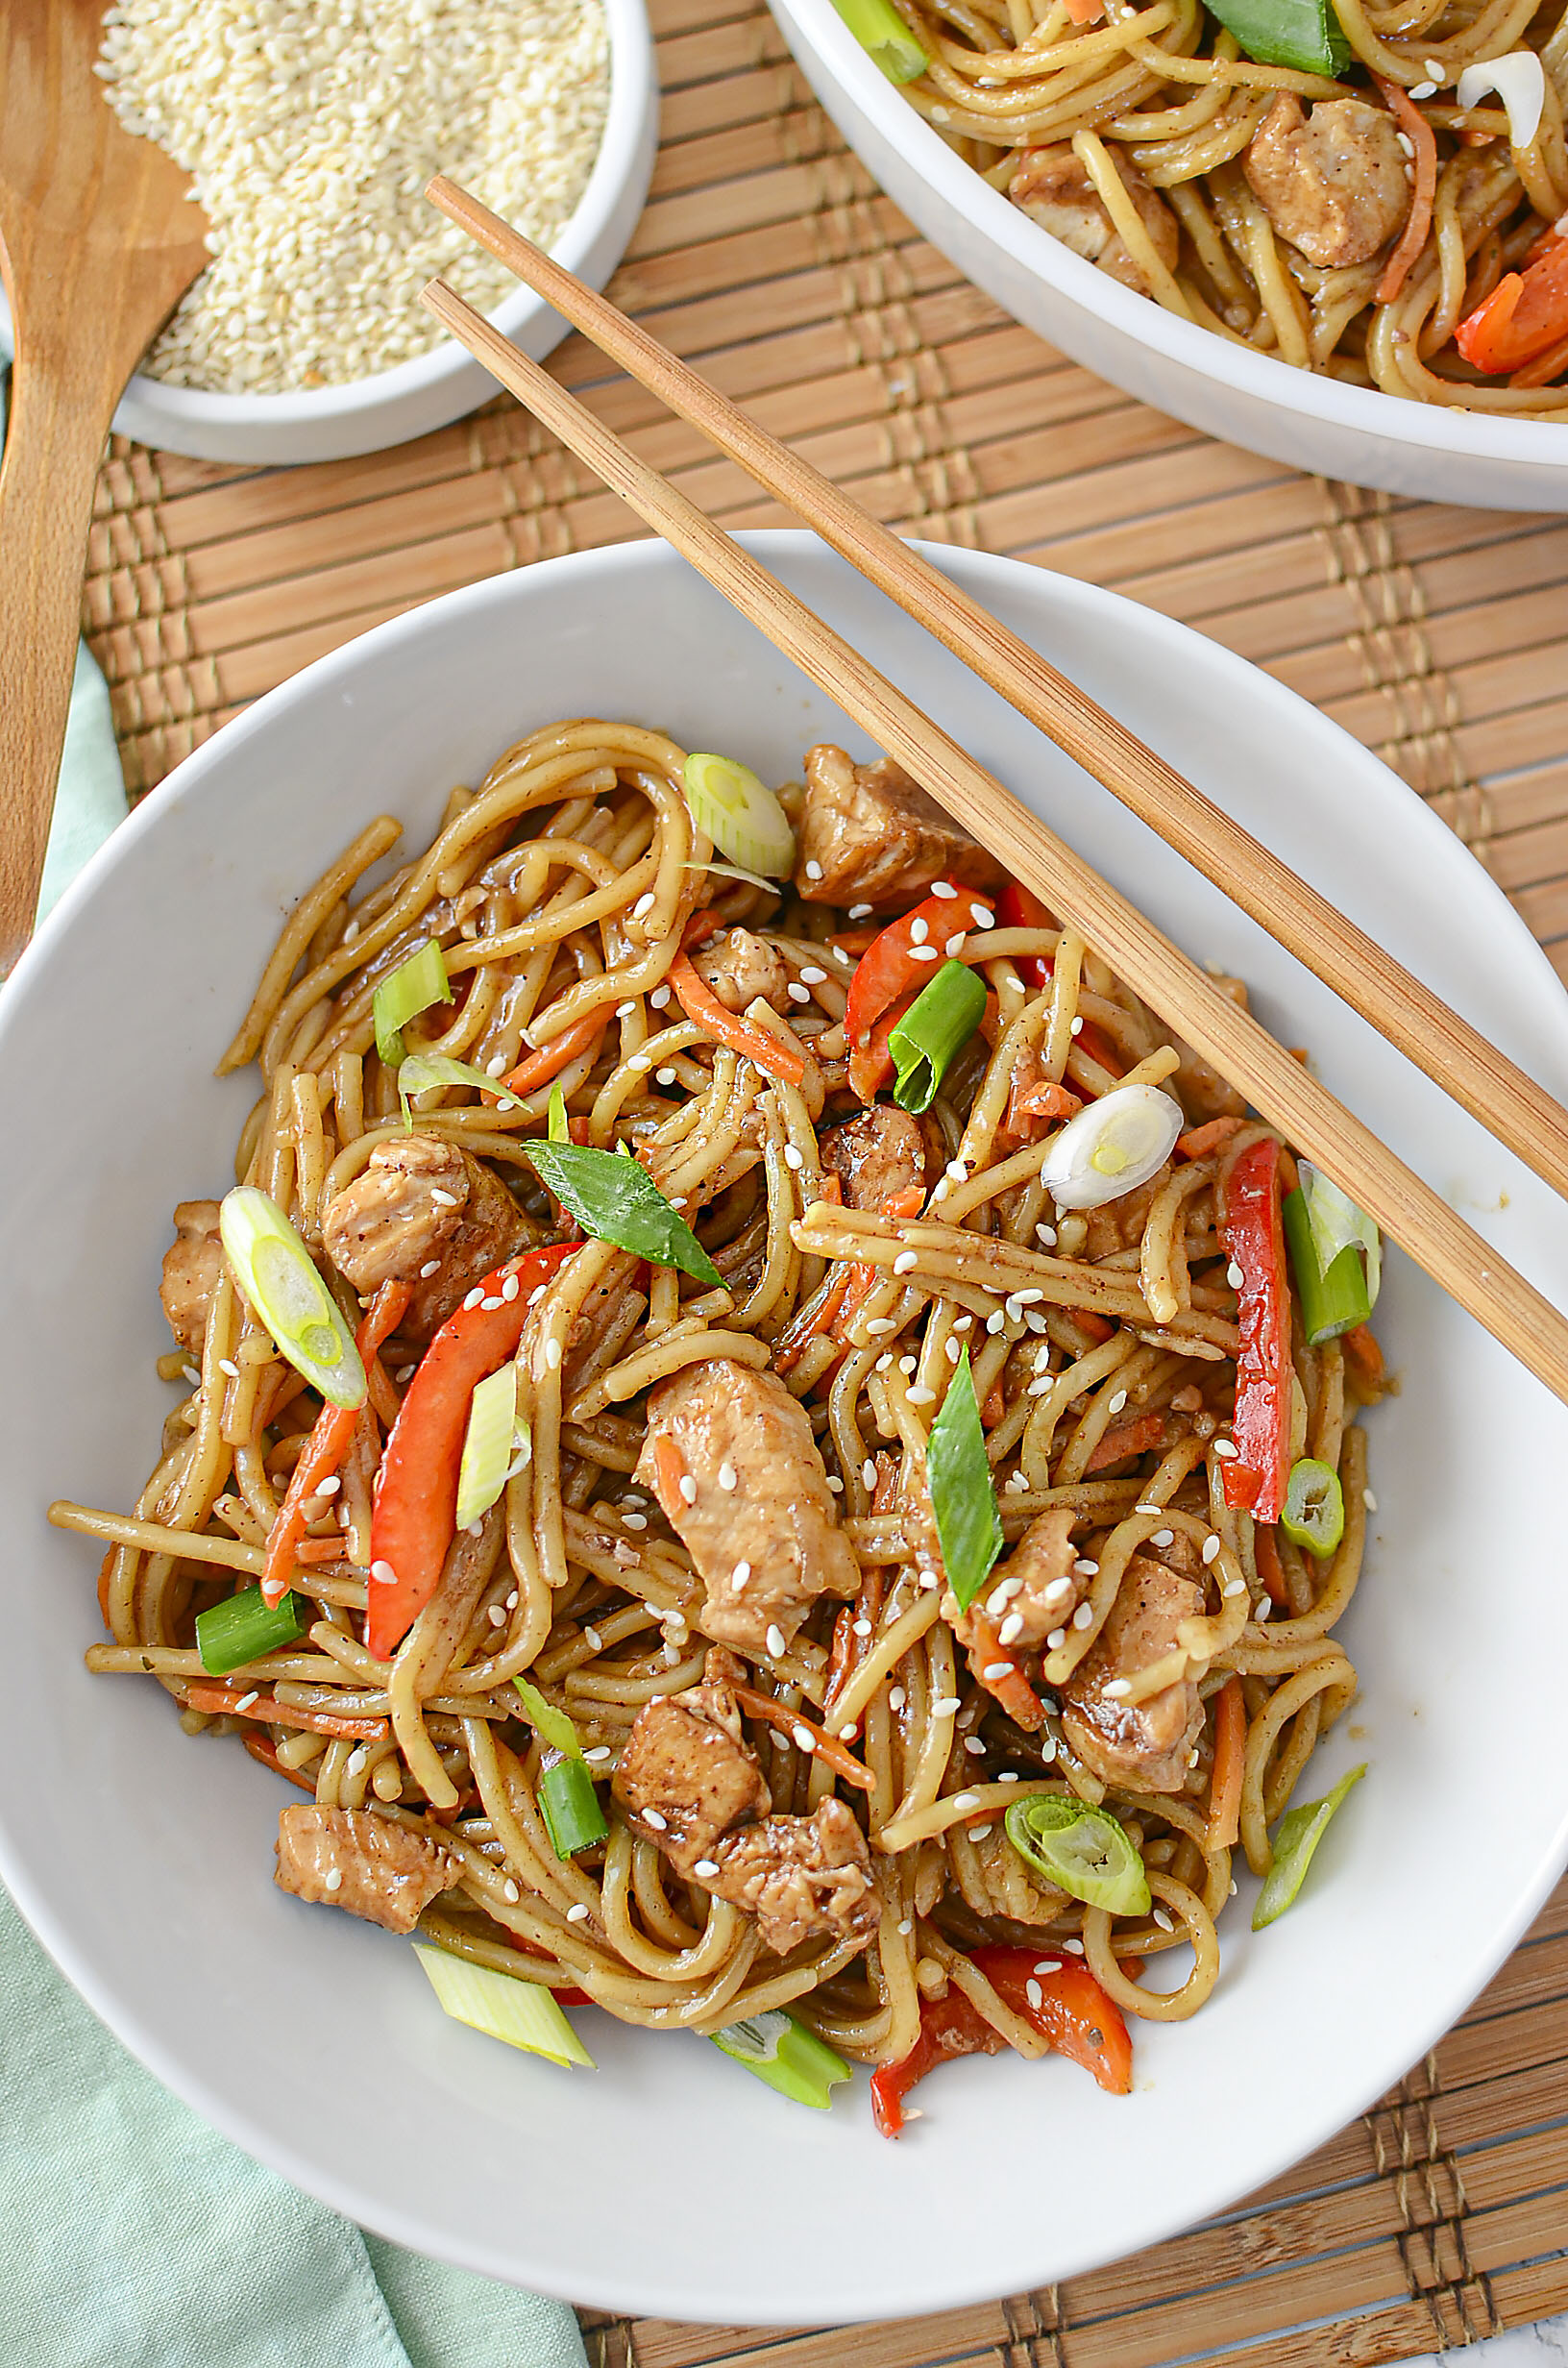 tender noodles, chicken, and crisp vegetables combined in an Asian sauce cooked in the Instant Pot.